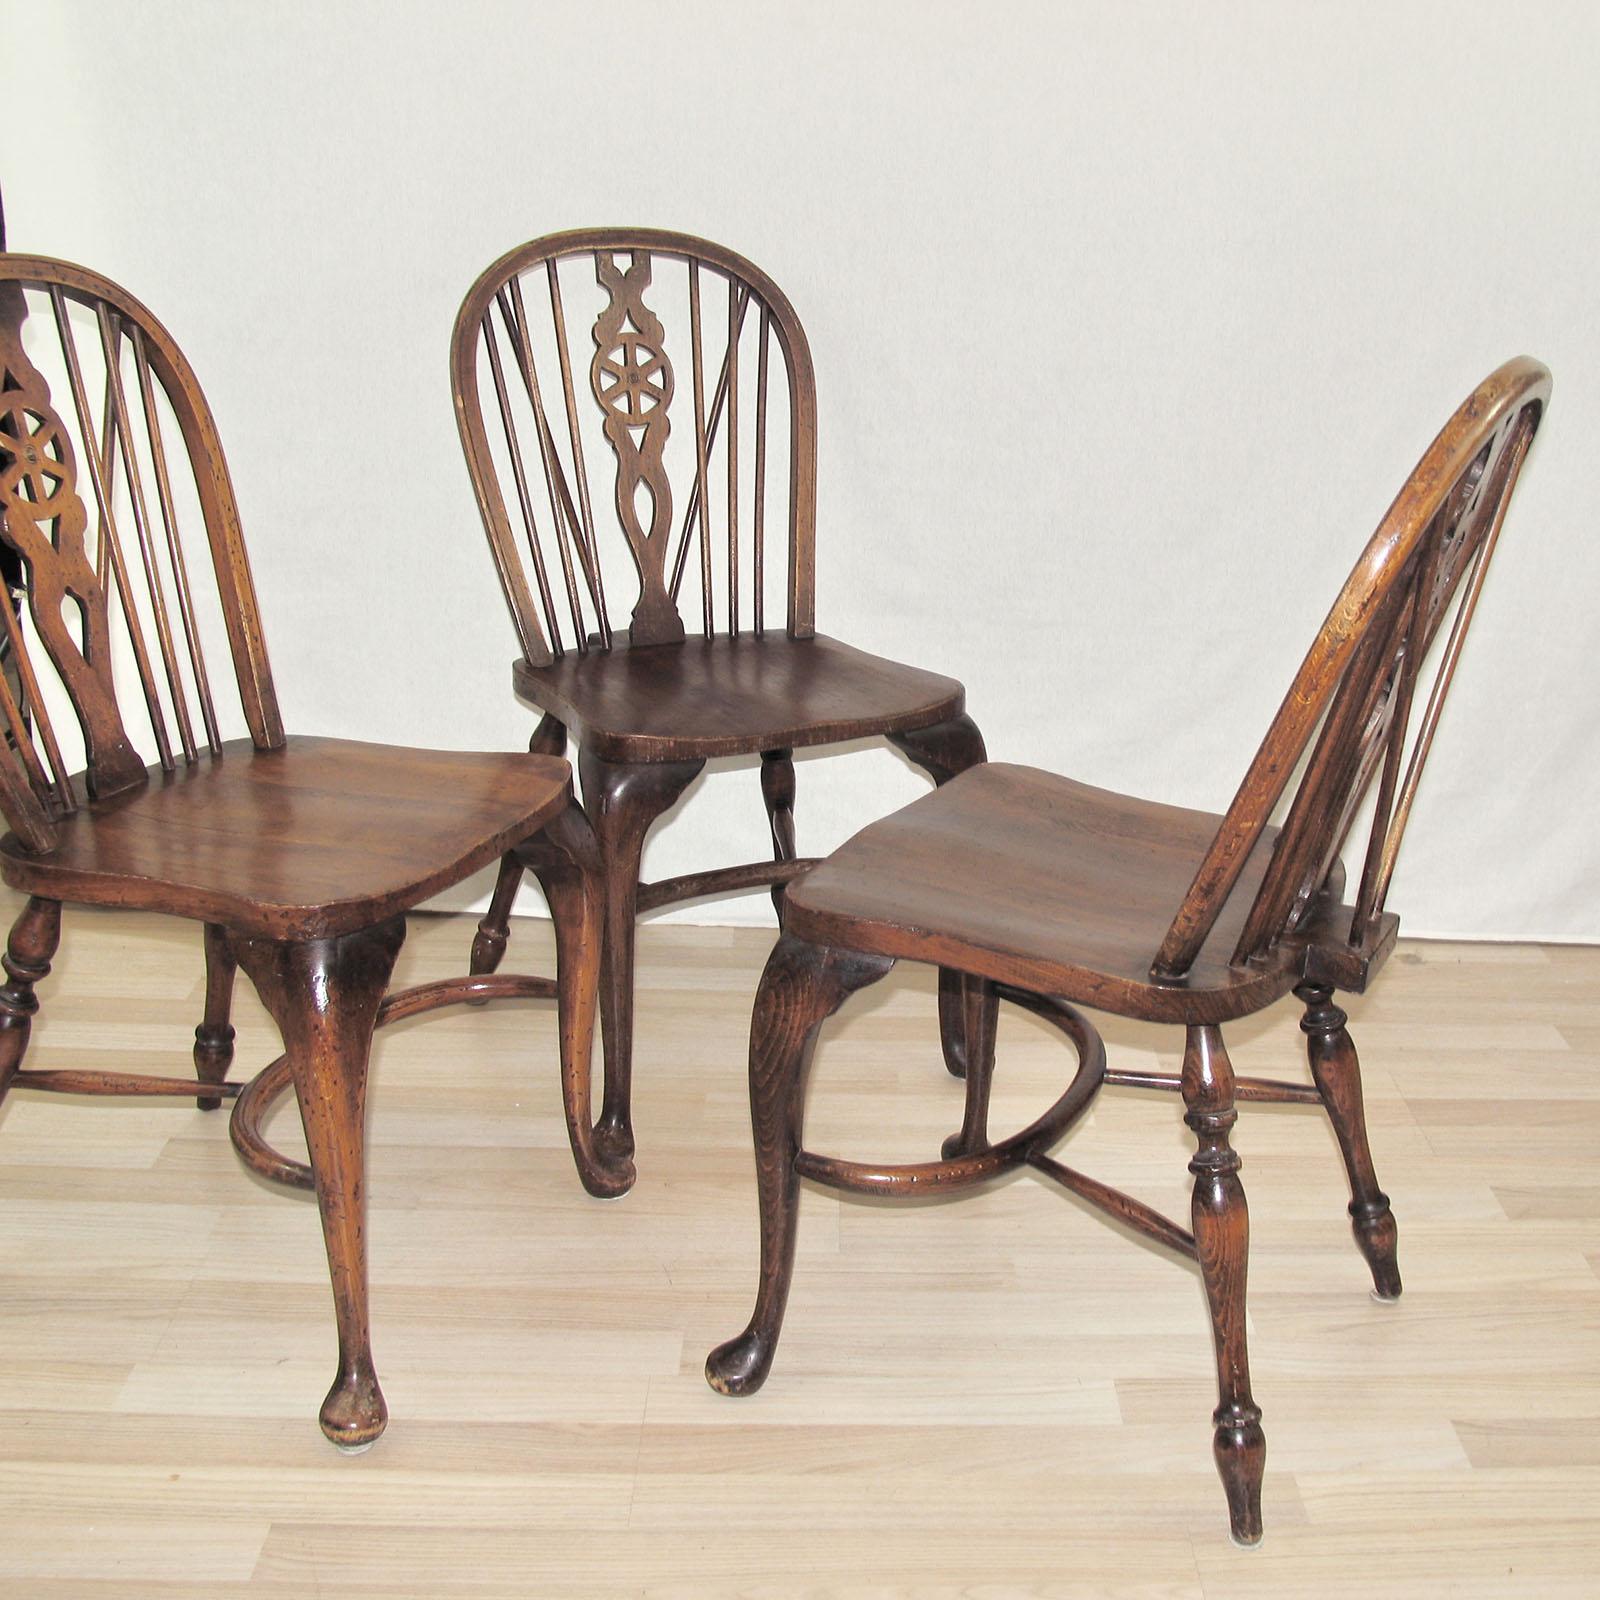 Mid-20th Century Set of Three Ash and Beech Wheelback Windsor Chairs with Cabriole Leg, England